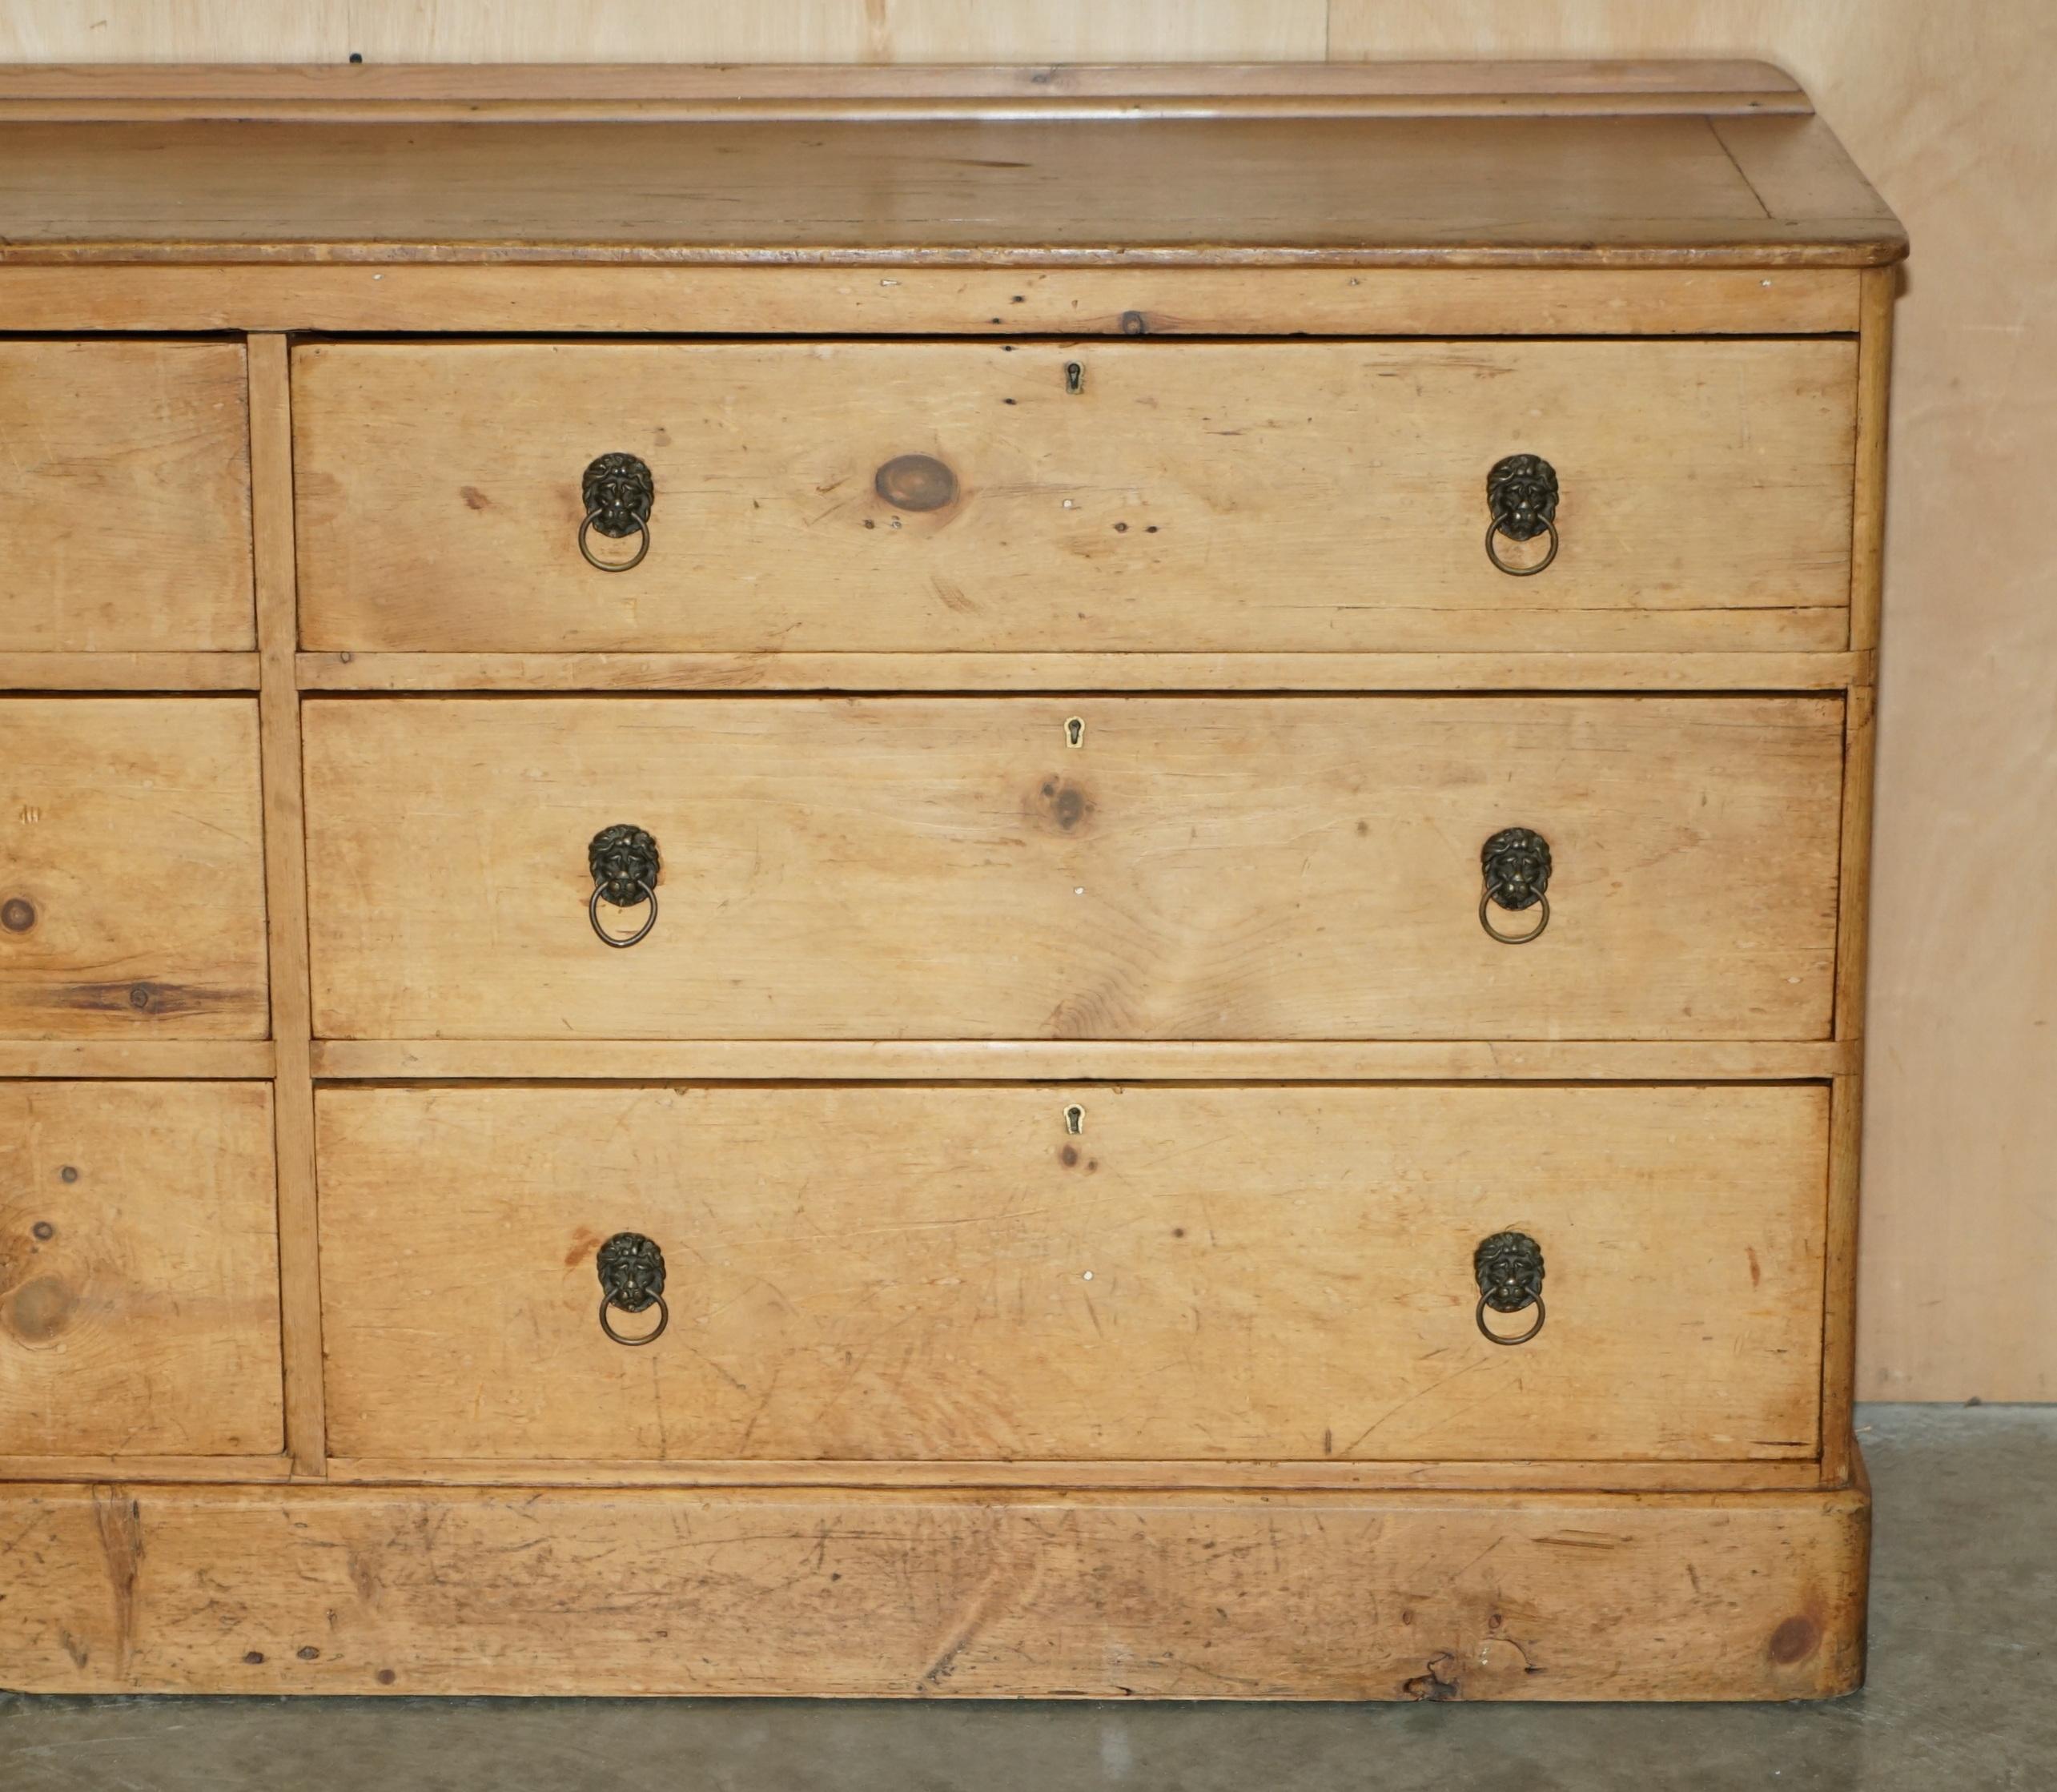 Hand-Crafted SUBLIME ANTiQUE CIRCA 1860 HABBERDASHERY APOCETHCARY BANK OF DRAWERS SIDEBOARD For Sale